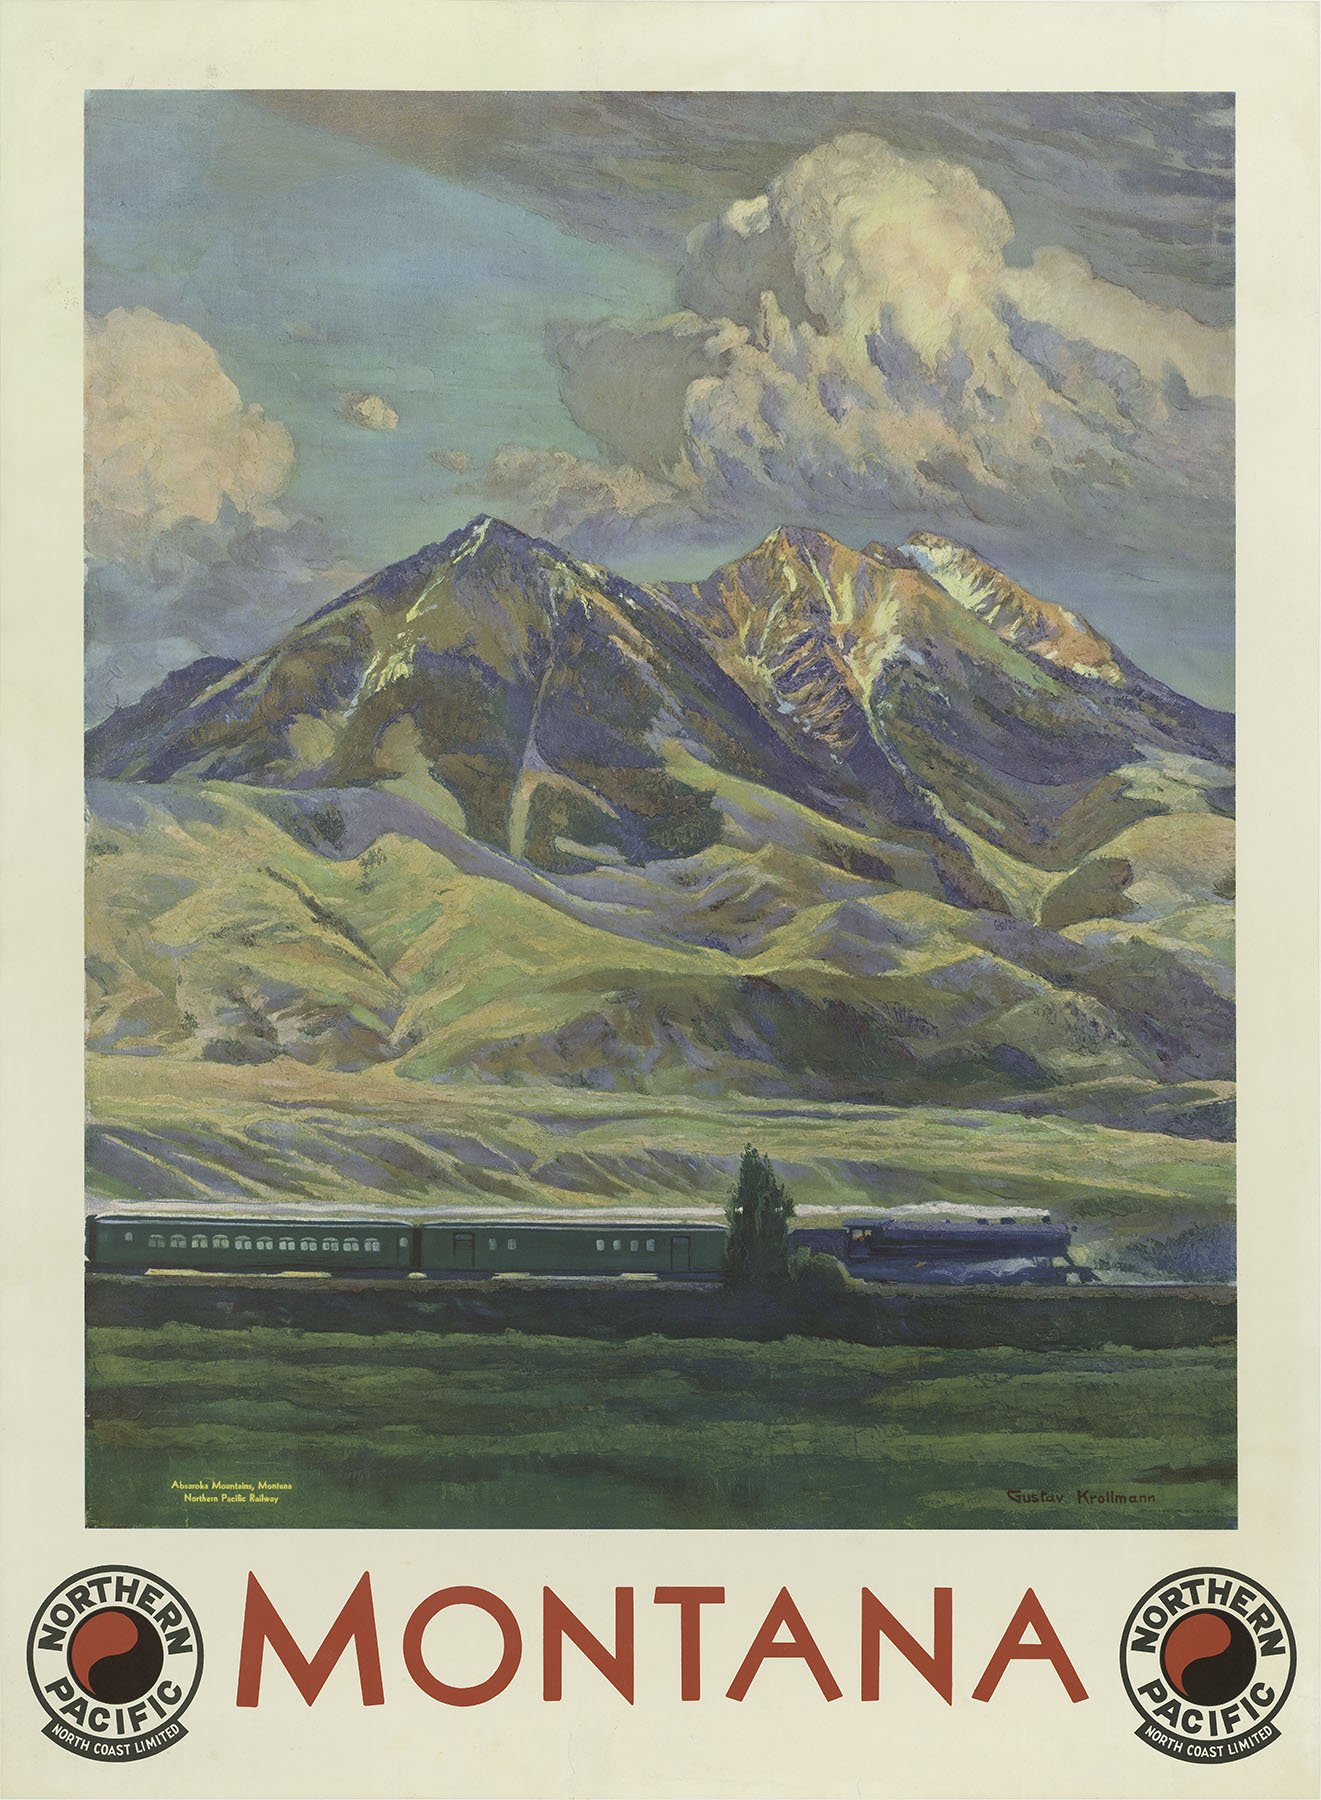 US American travel poster